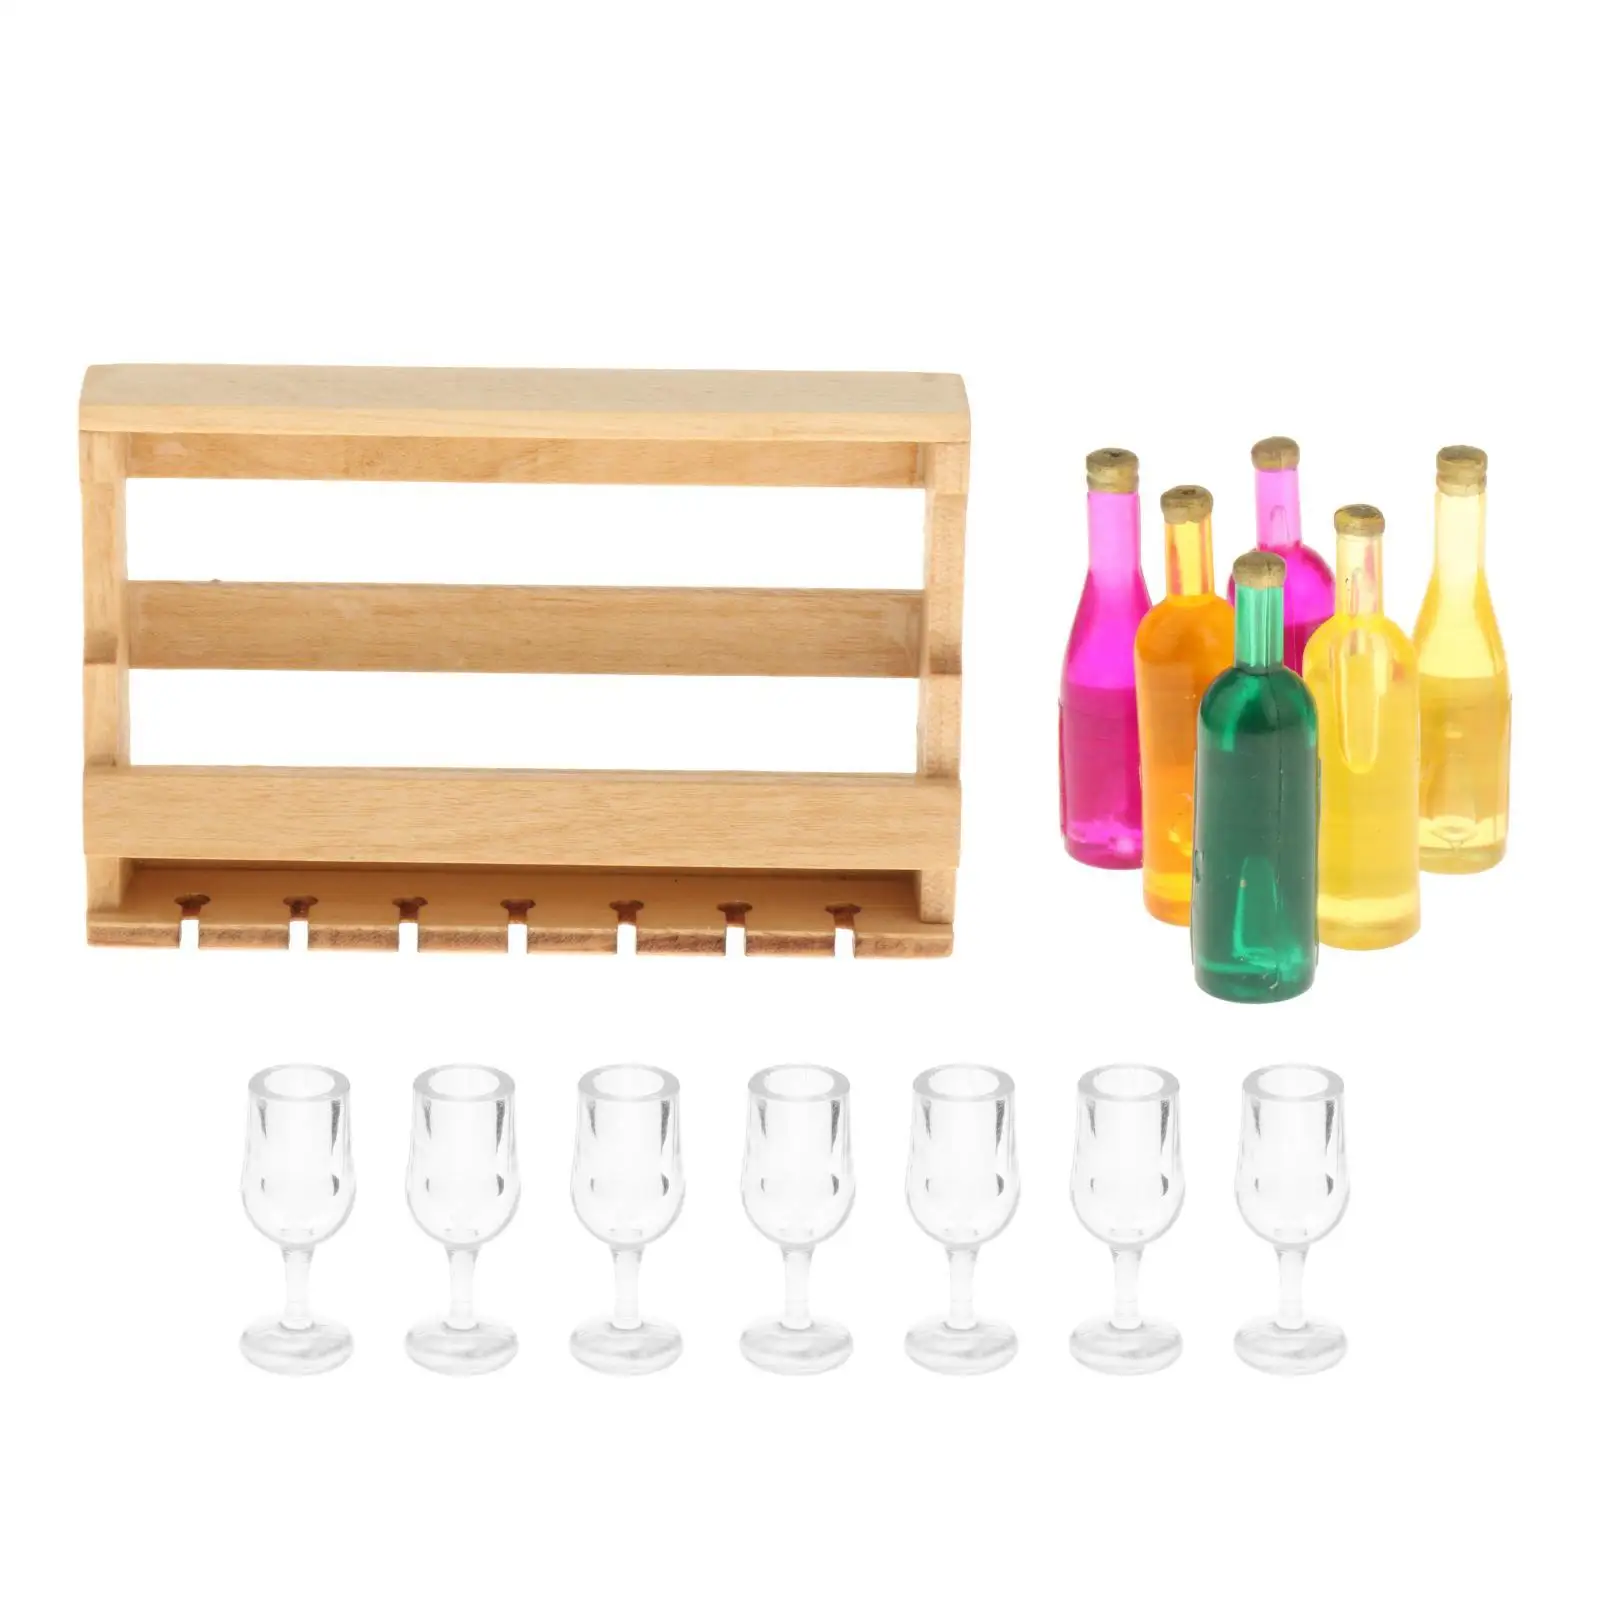 14x 1:12 Wine Rack with Bottles and Glass Cup, Doll Accessories Decoration Toys